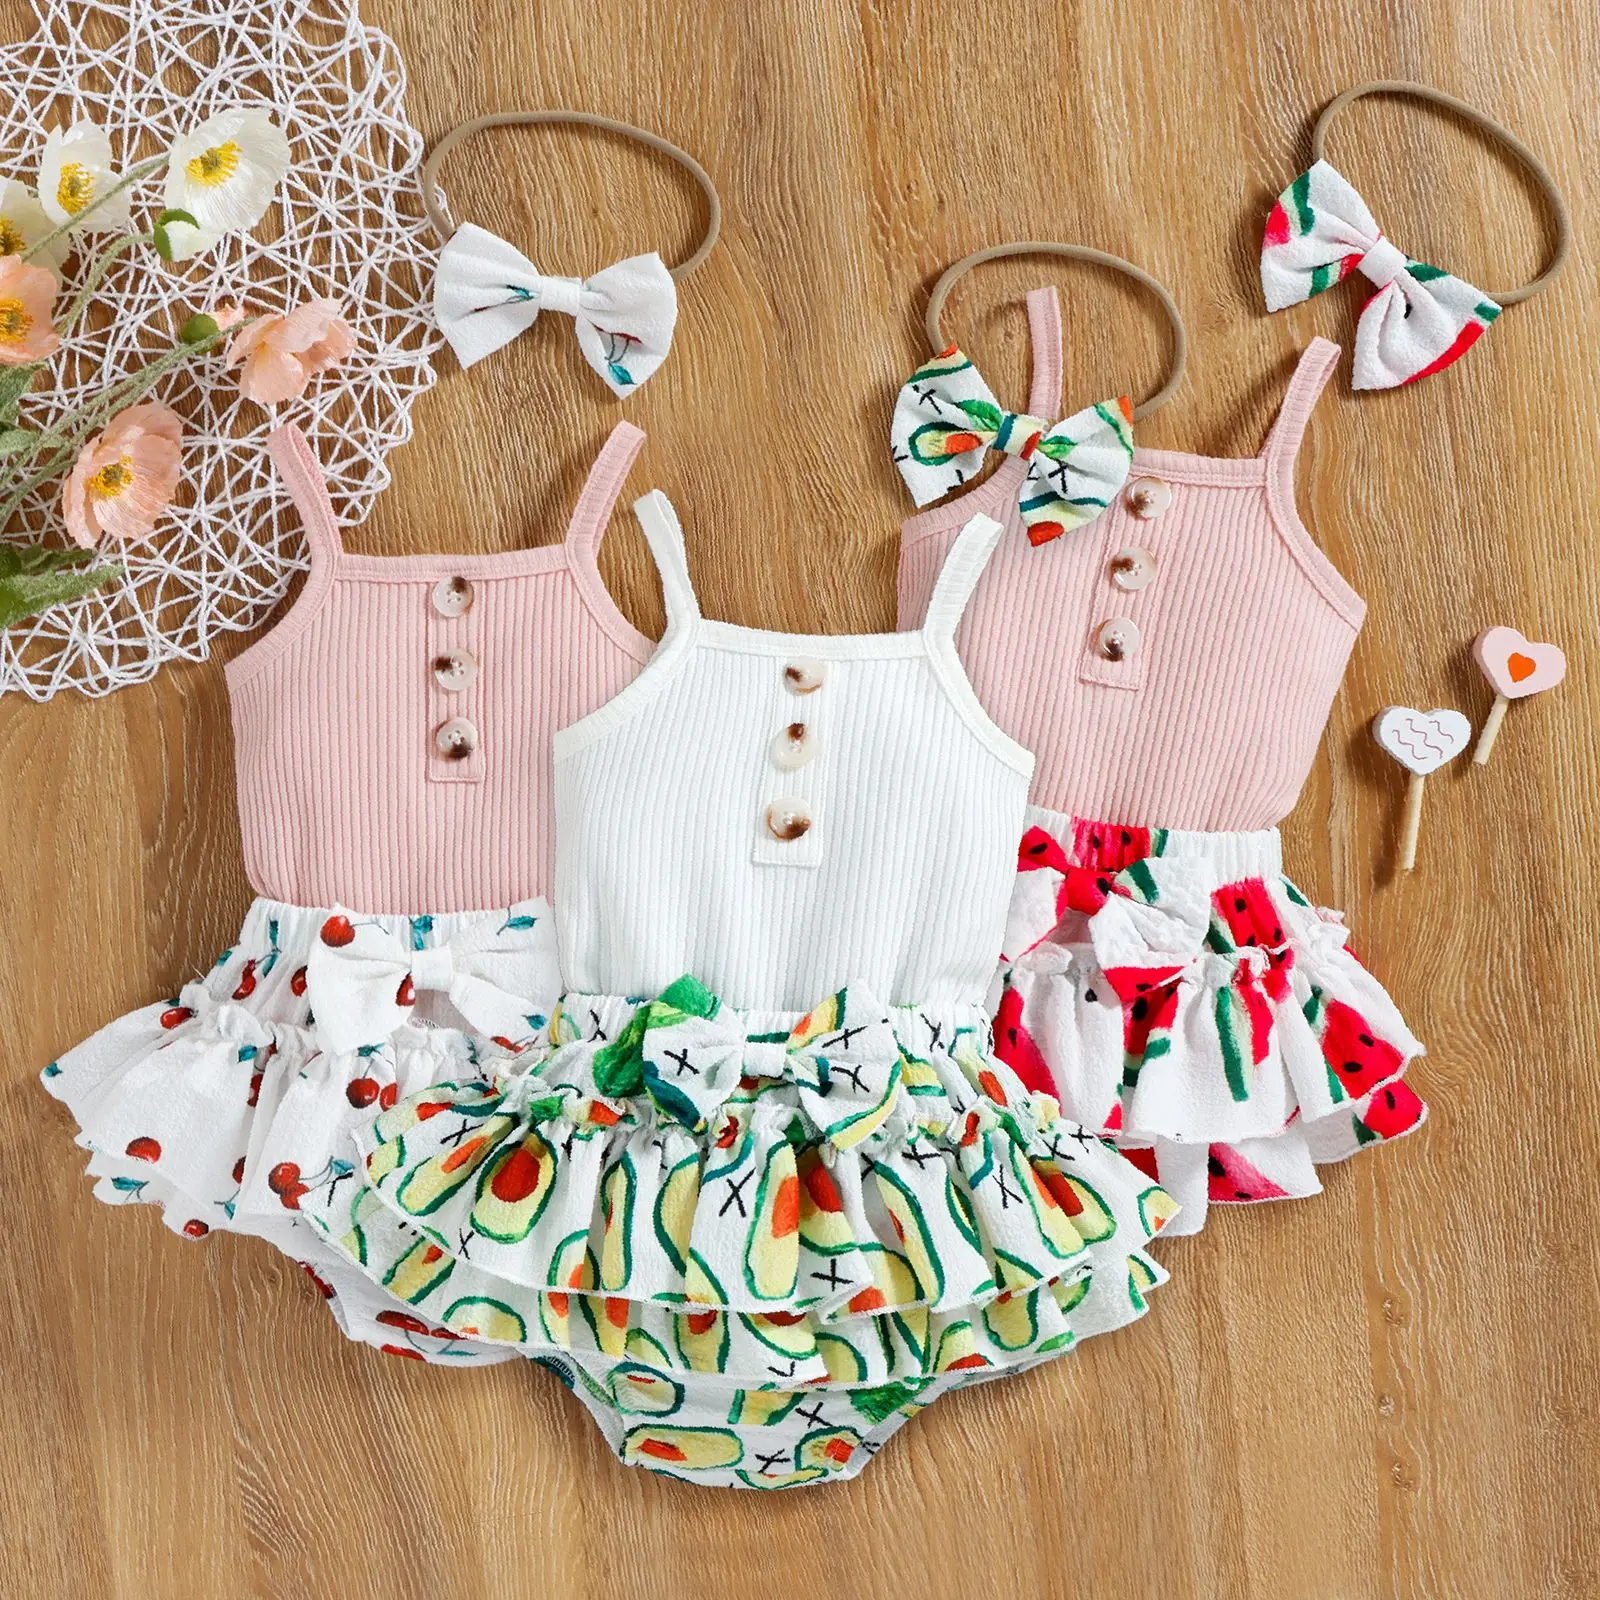 Fashion Summer Newborn Baby Girl Clothes Set Fruit Print Skirt Pit Romper Strap Tops Headband Infant 3Pcs Toddler Outfits 0-24M